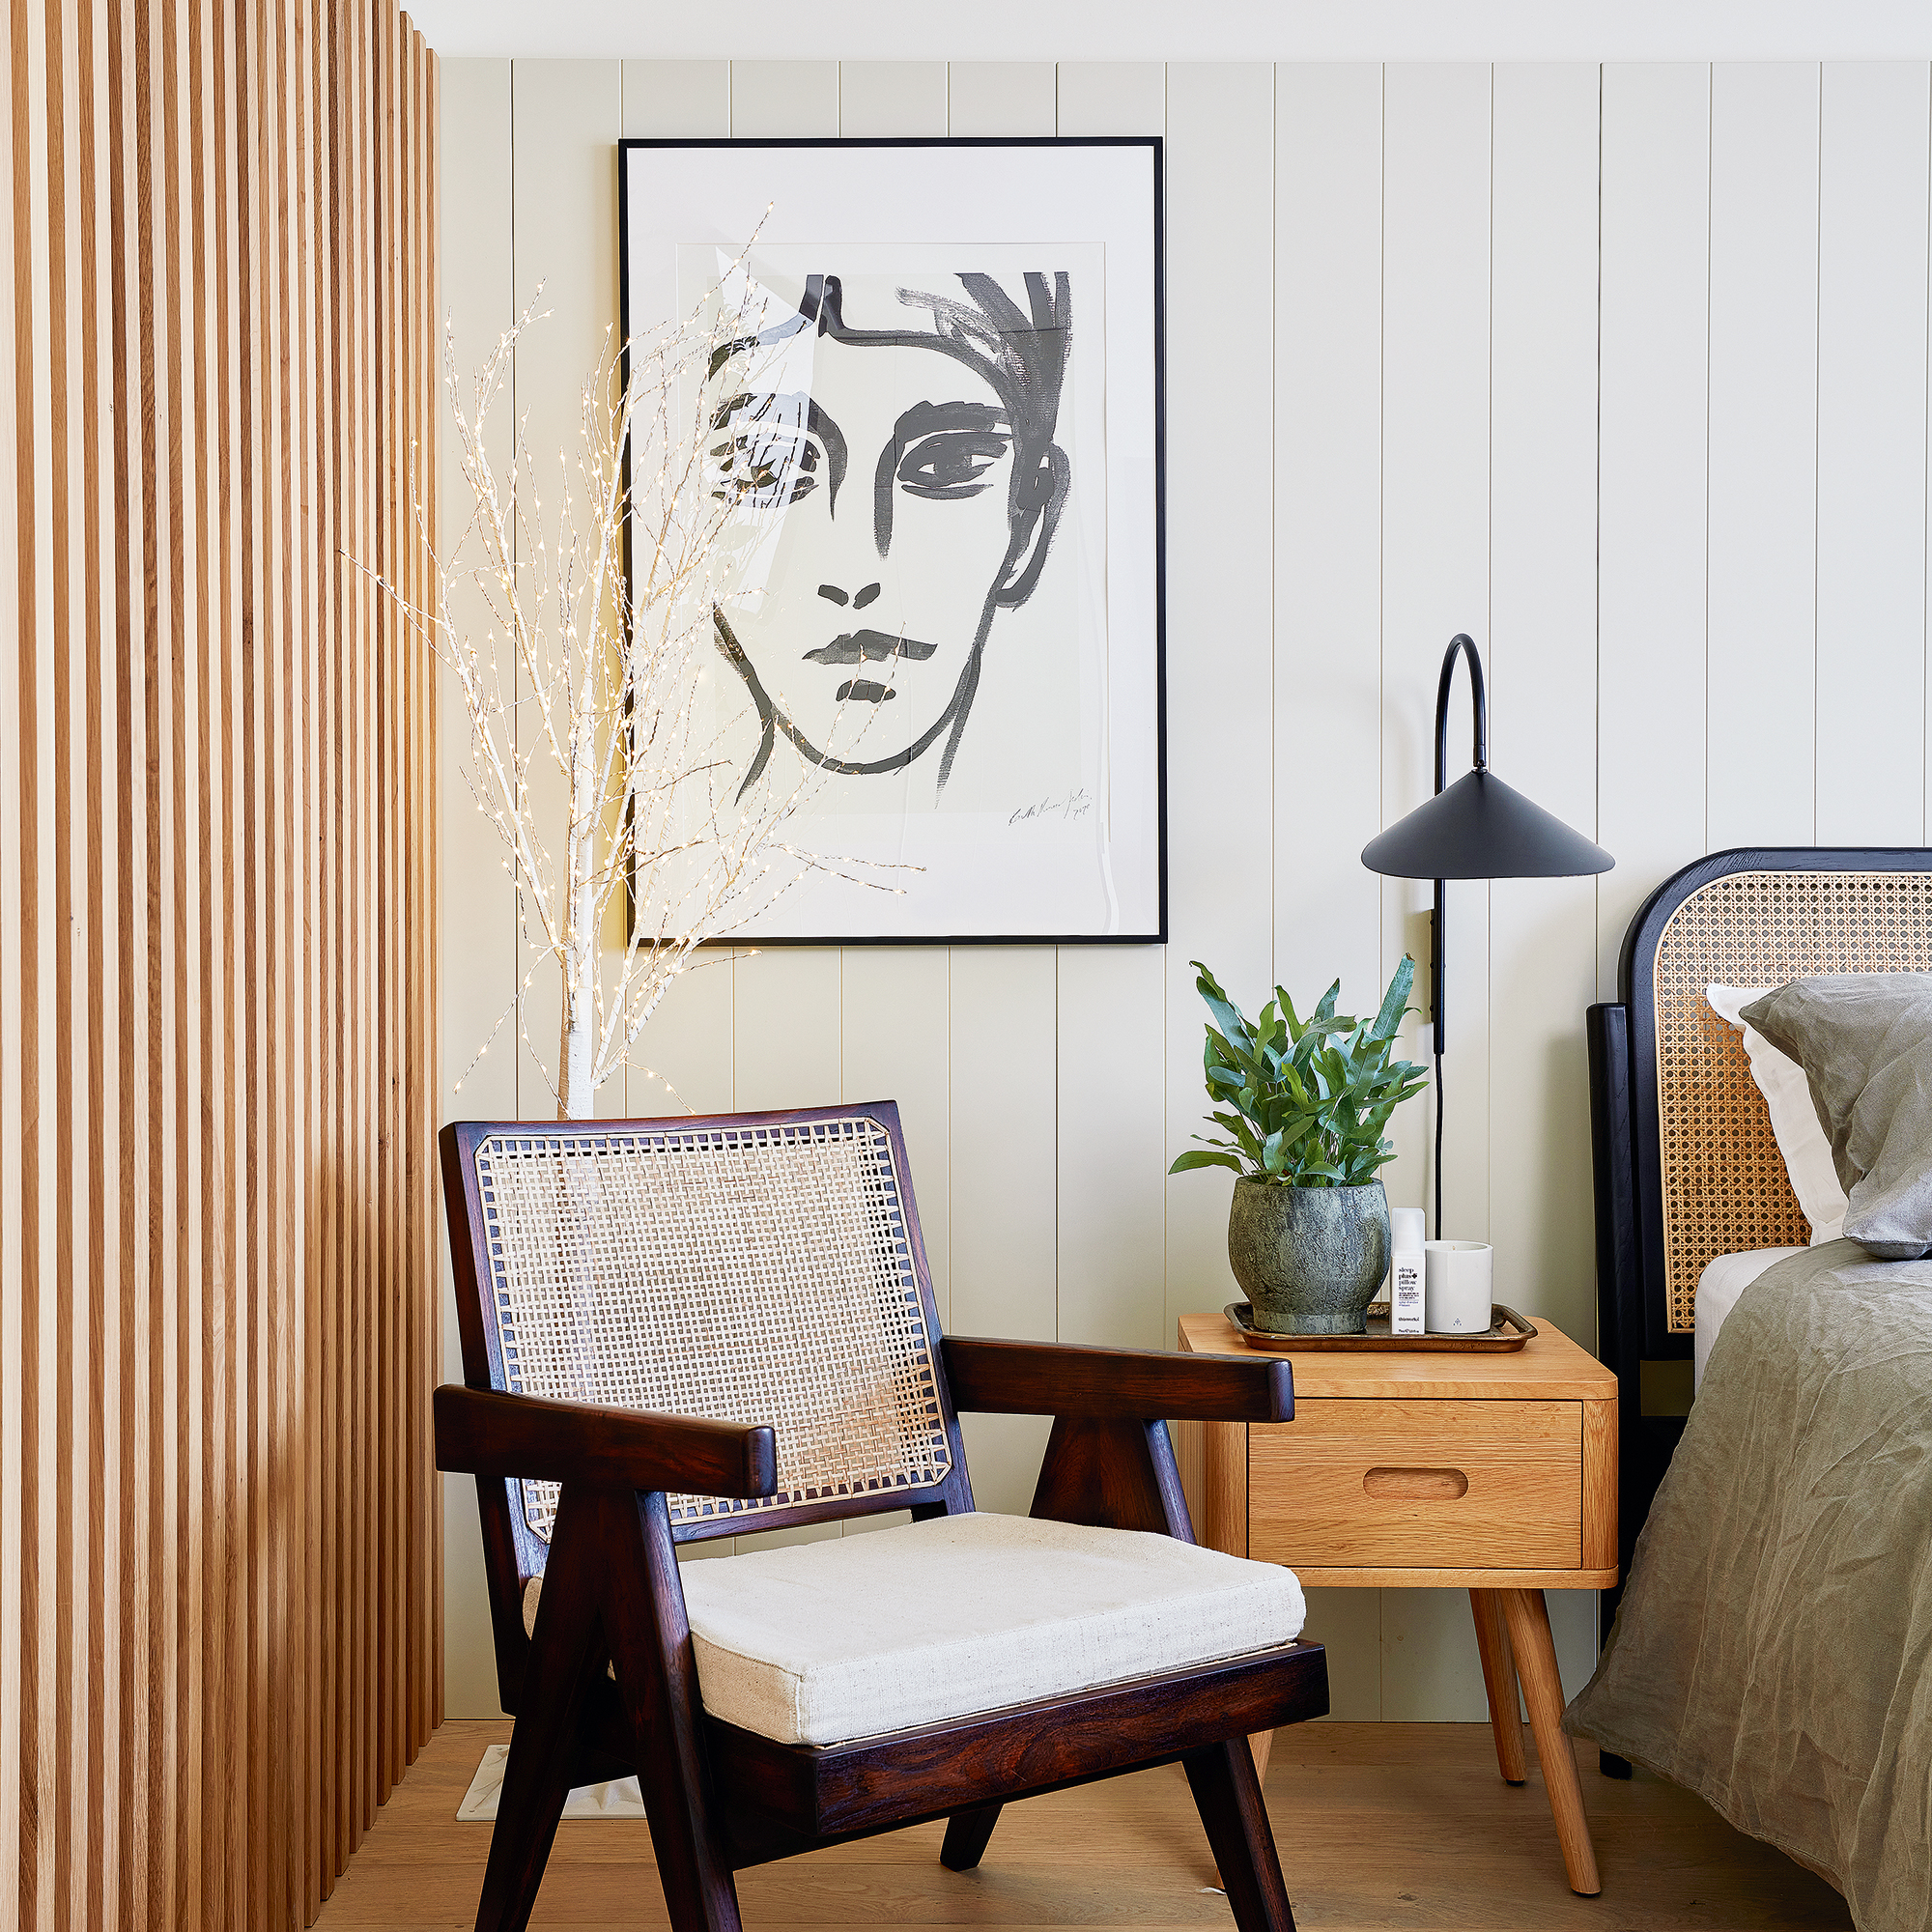 Bedroom with wall panelling, artwork, armchair and wall light